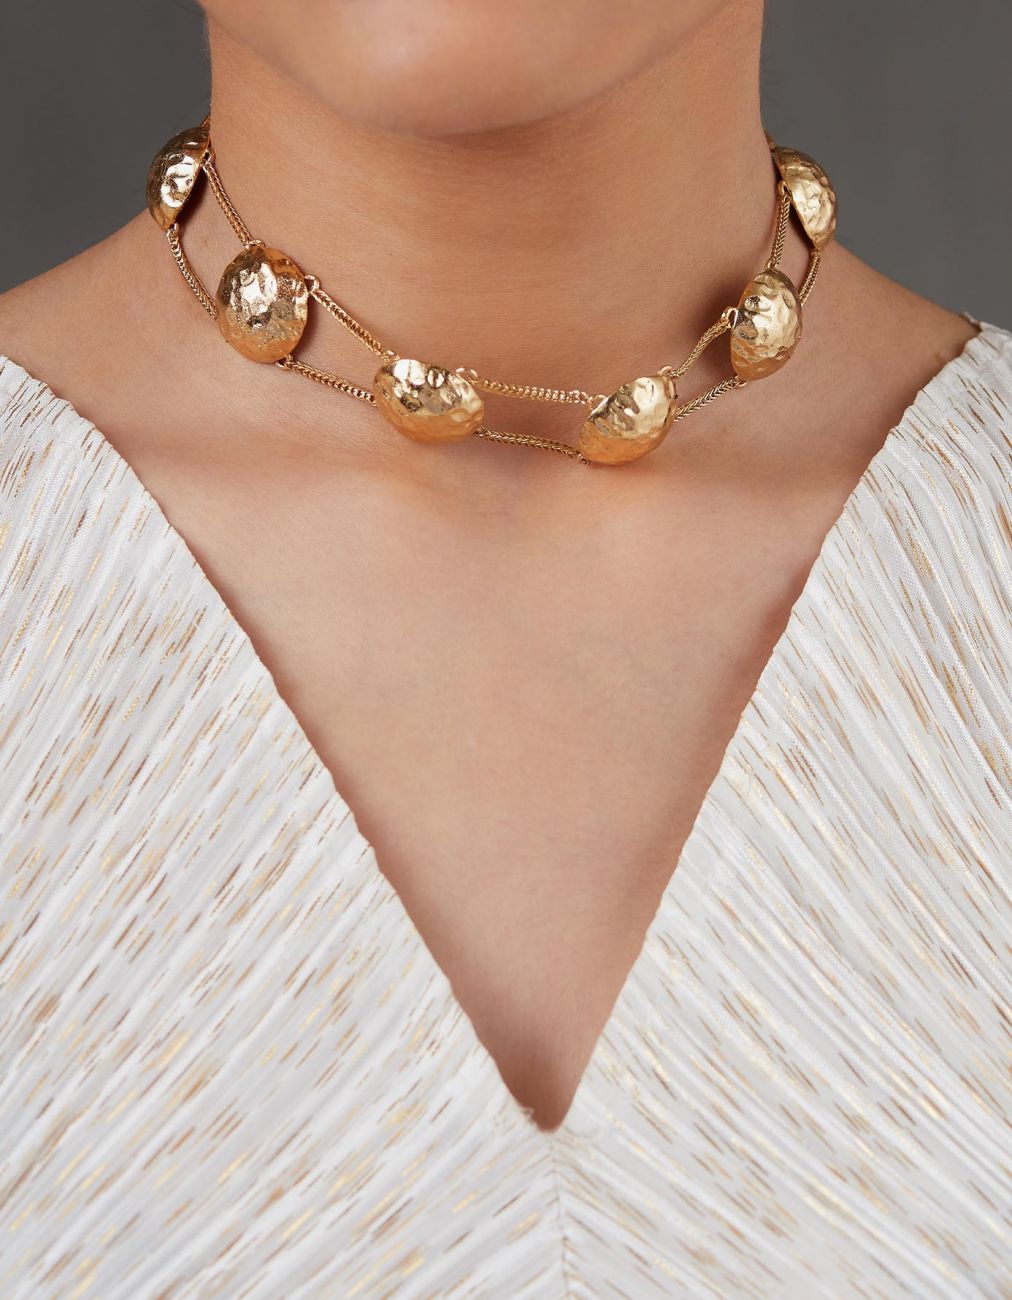 Gold Hammered Ball And Chain Choker